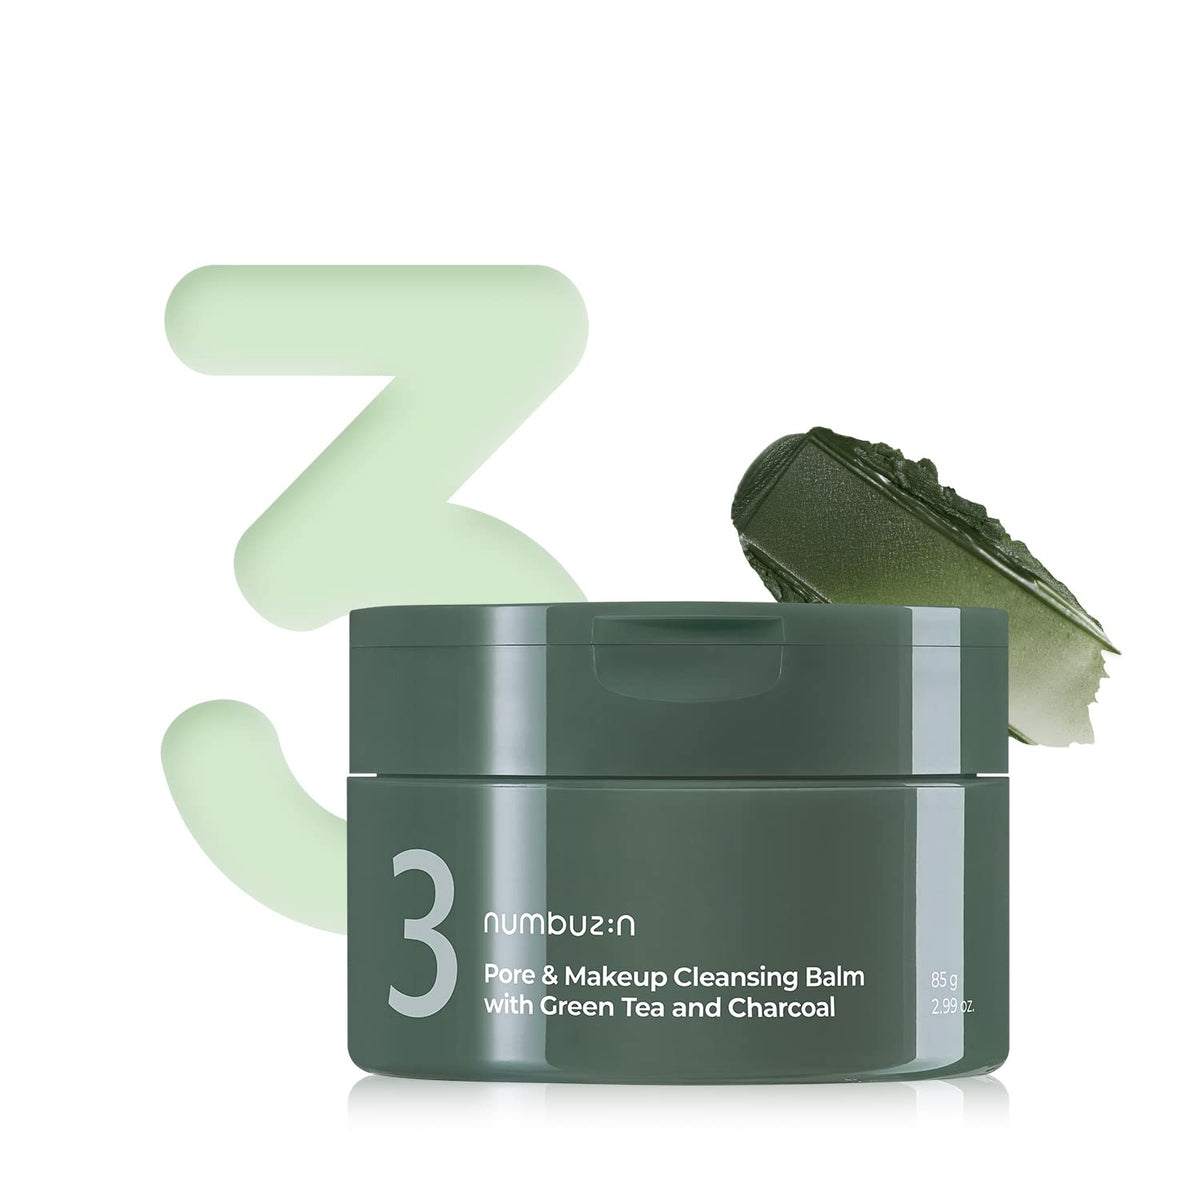 numbuzin No.3 Pore & Makeup Cleansing Balm with Green Tea and Charcoal 85ml/ 2.99 oz.